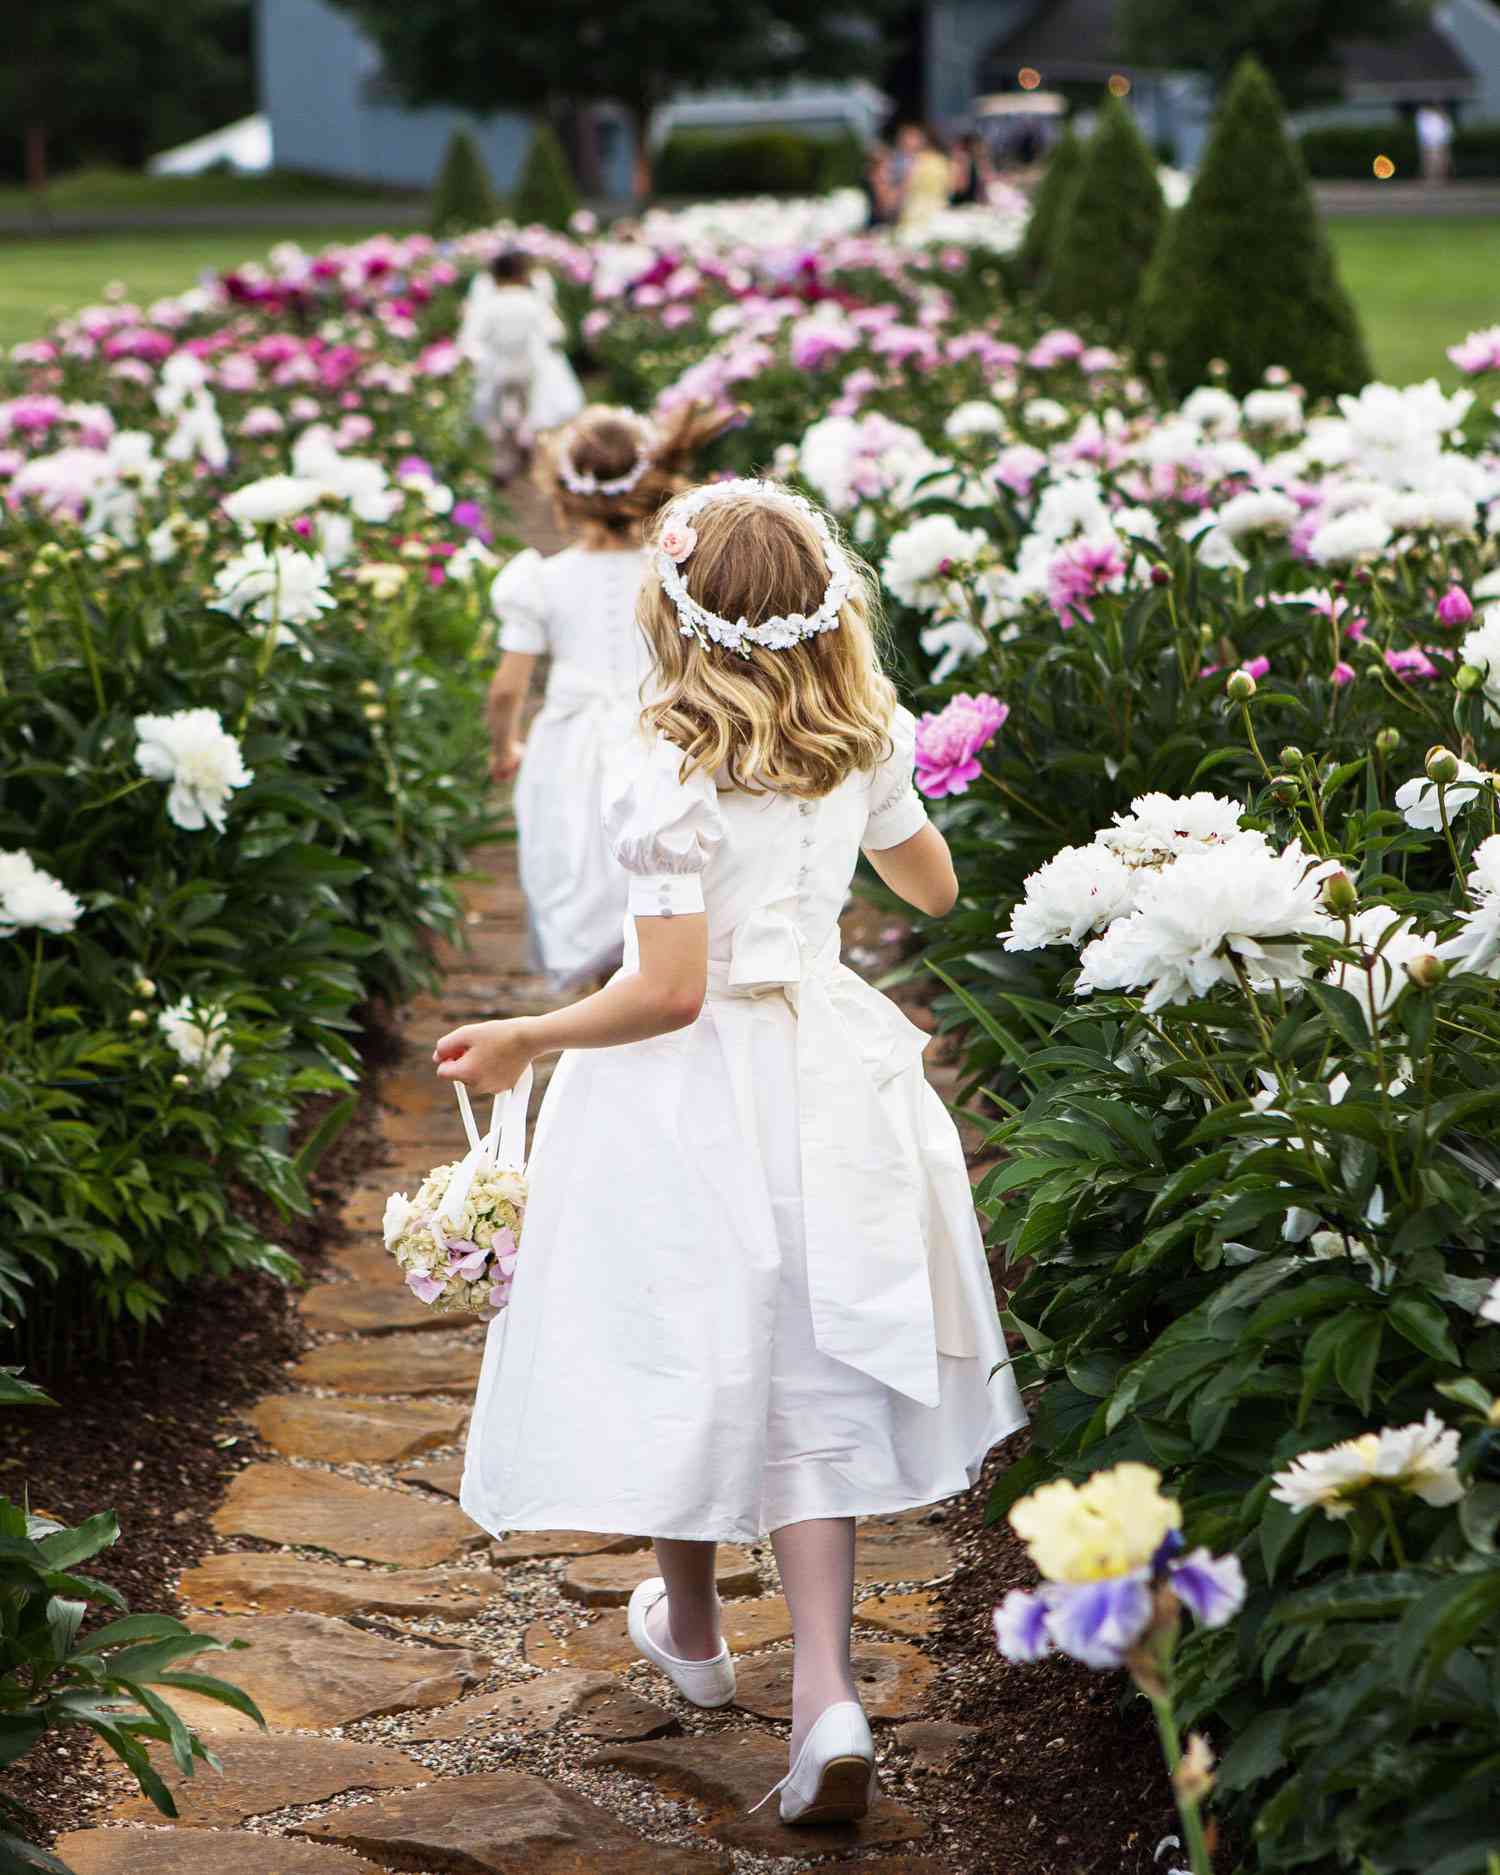 The Path of Peonies